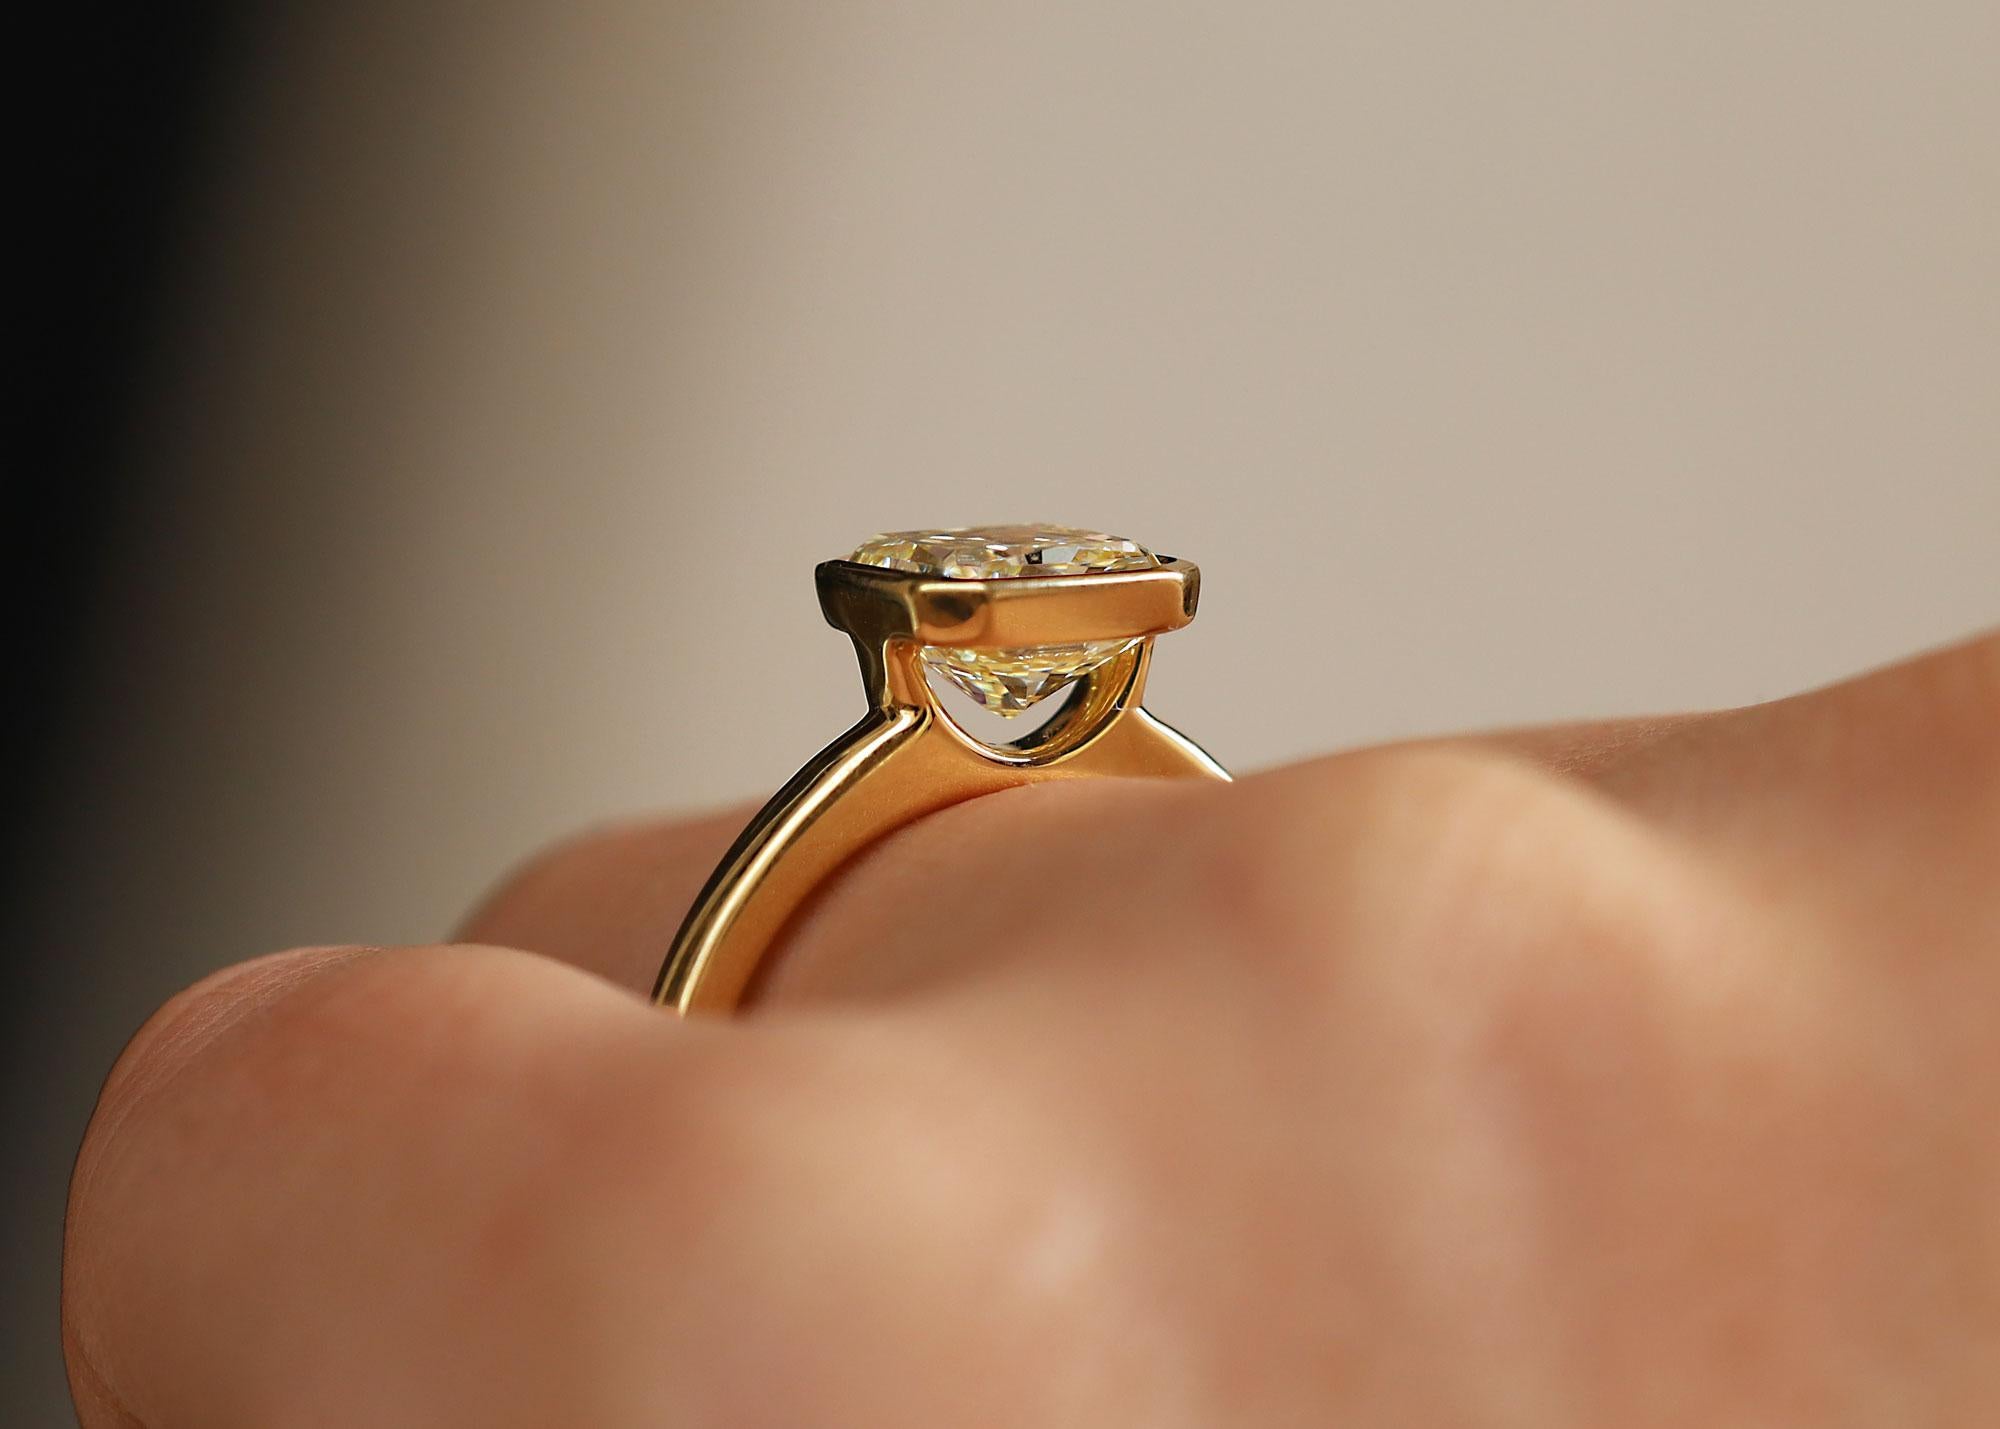 New  to our collection is this 2.09 carat natural fancy yellow diamond solitaire engagement ring. The simplicity of the rich, 18k yellow gold bezel setting adds warmth to the beautiful golden color of this earth-mined diamond. The expertly faceted